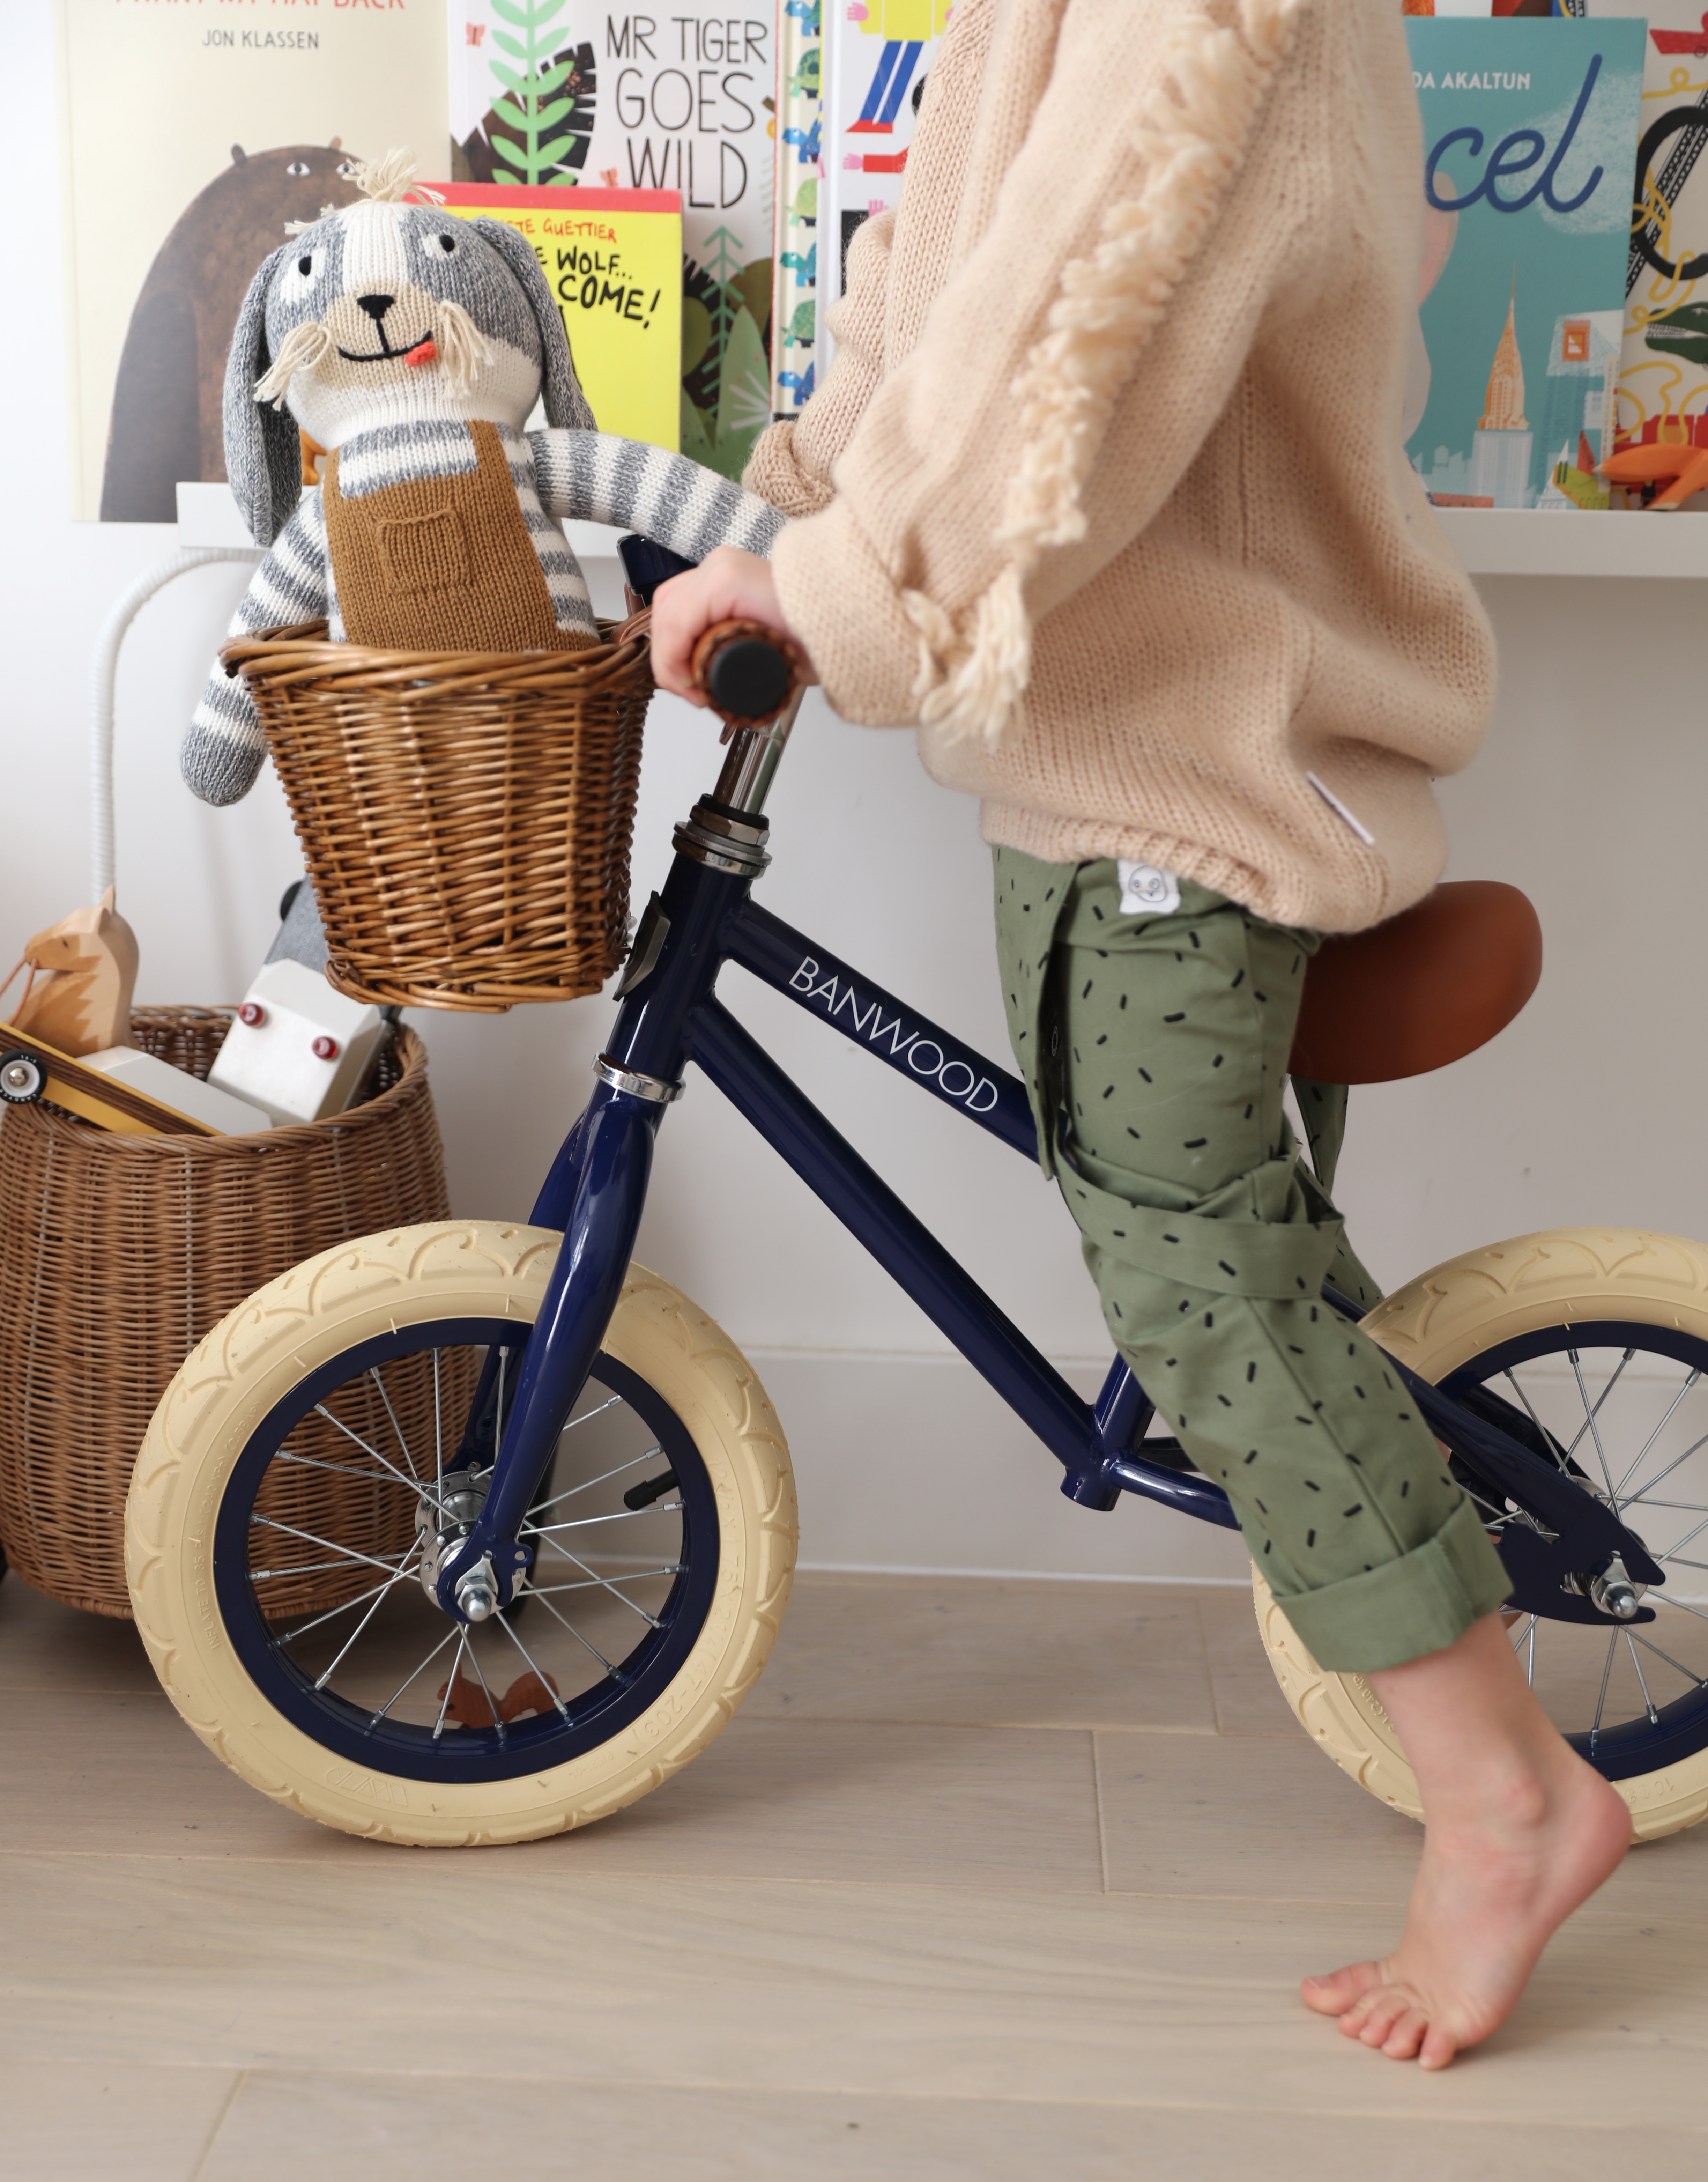 Banwood_bike_giveaway_scout_and_co_kids